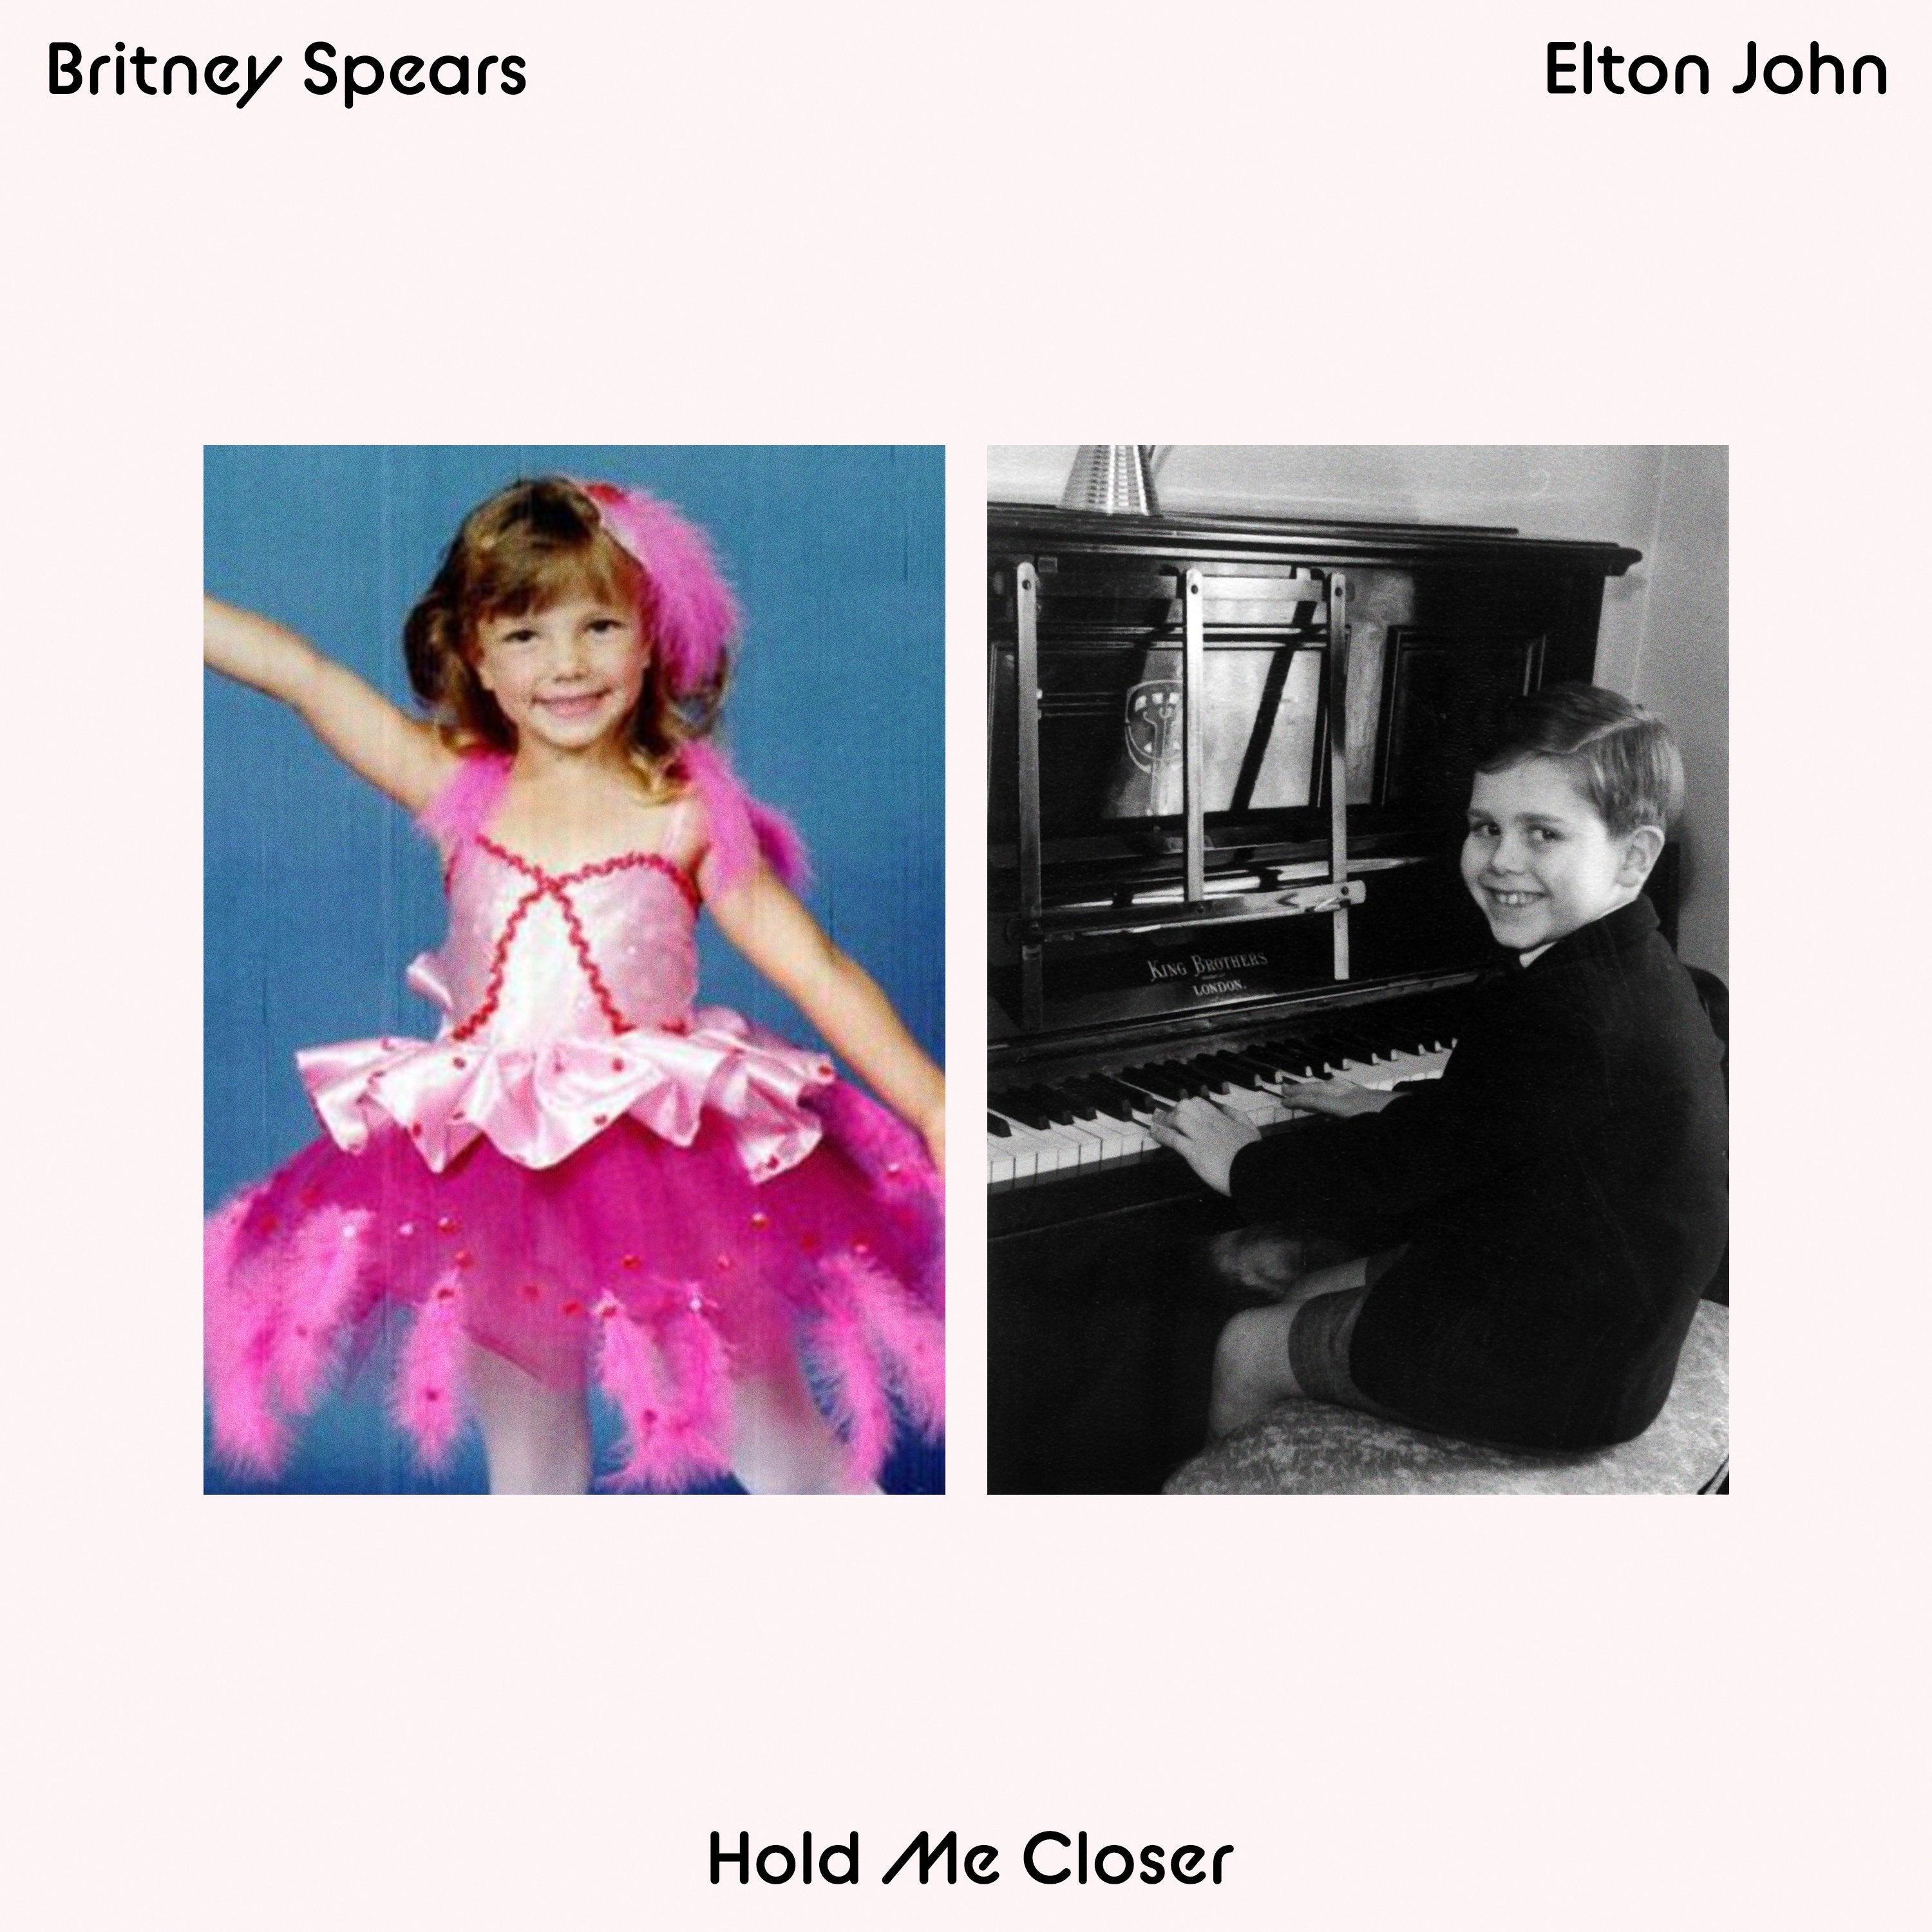 How "Hold Me Closer" by Britney Spears & Elton John was made